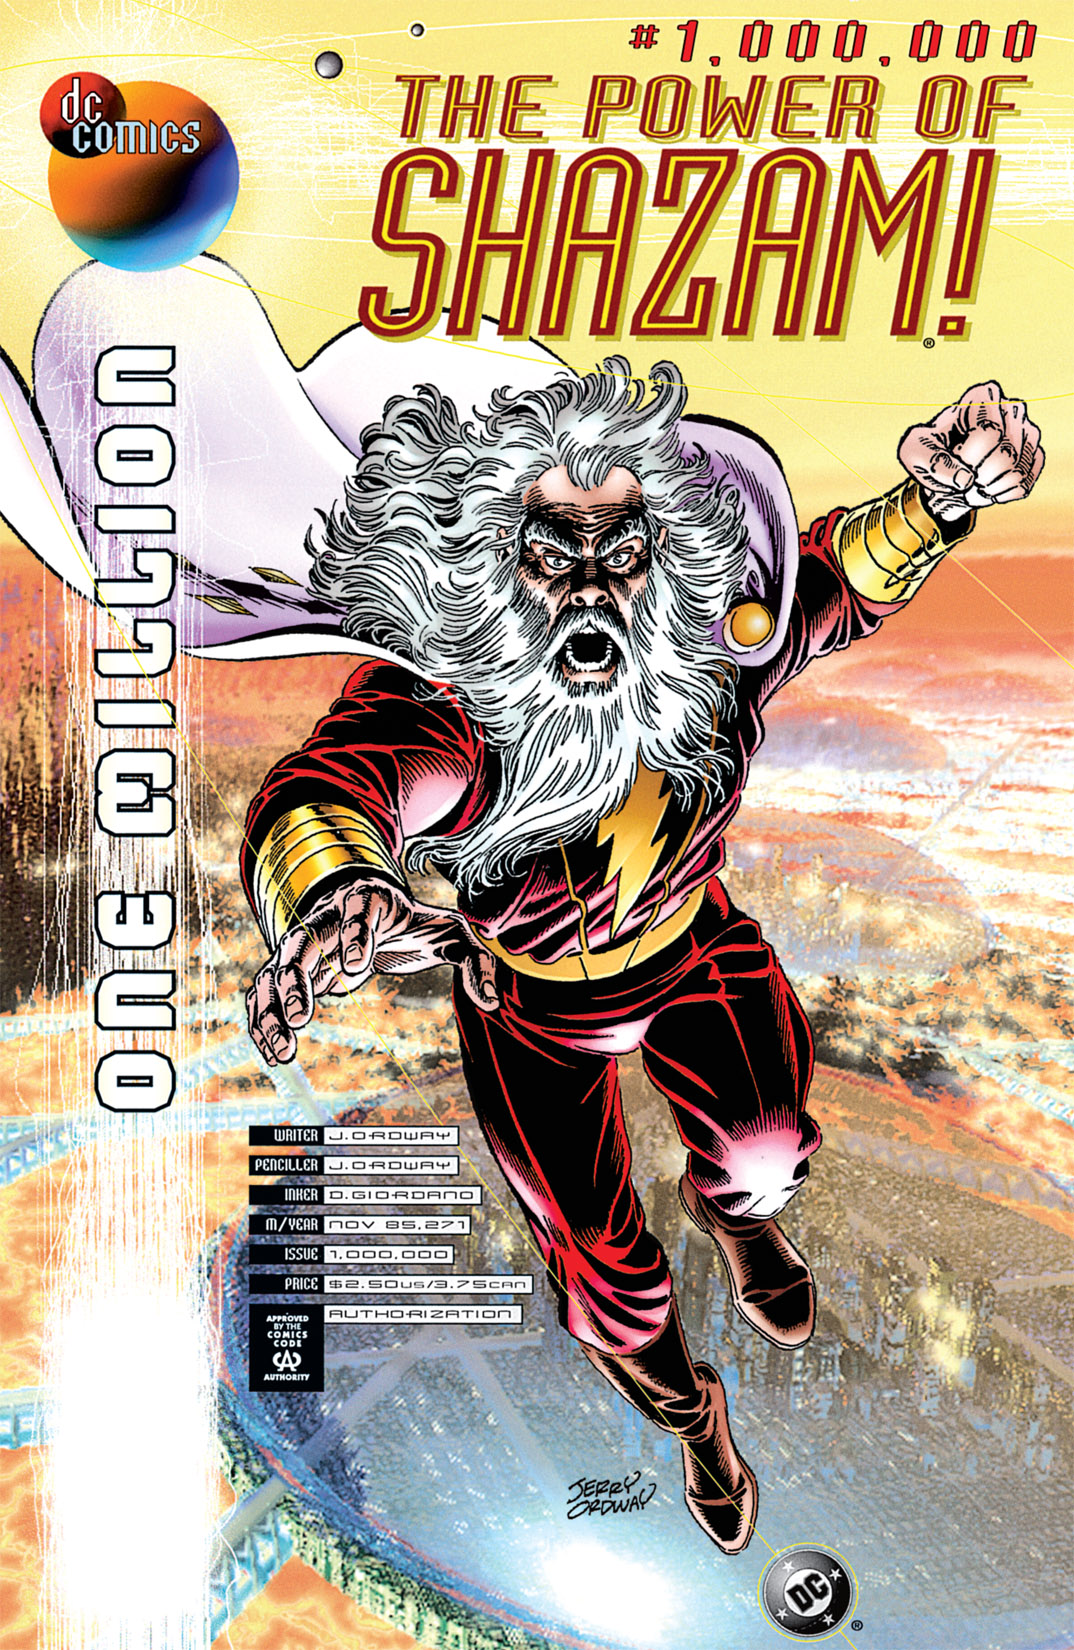 Read online The Power of SHAZAM! comic -  Issue #1000000 - 1